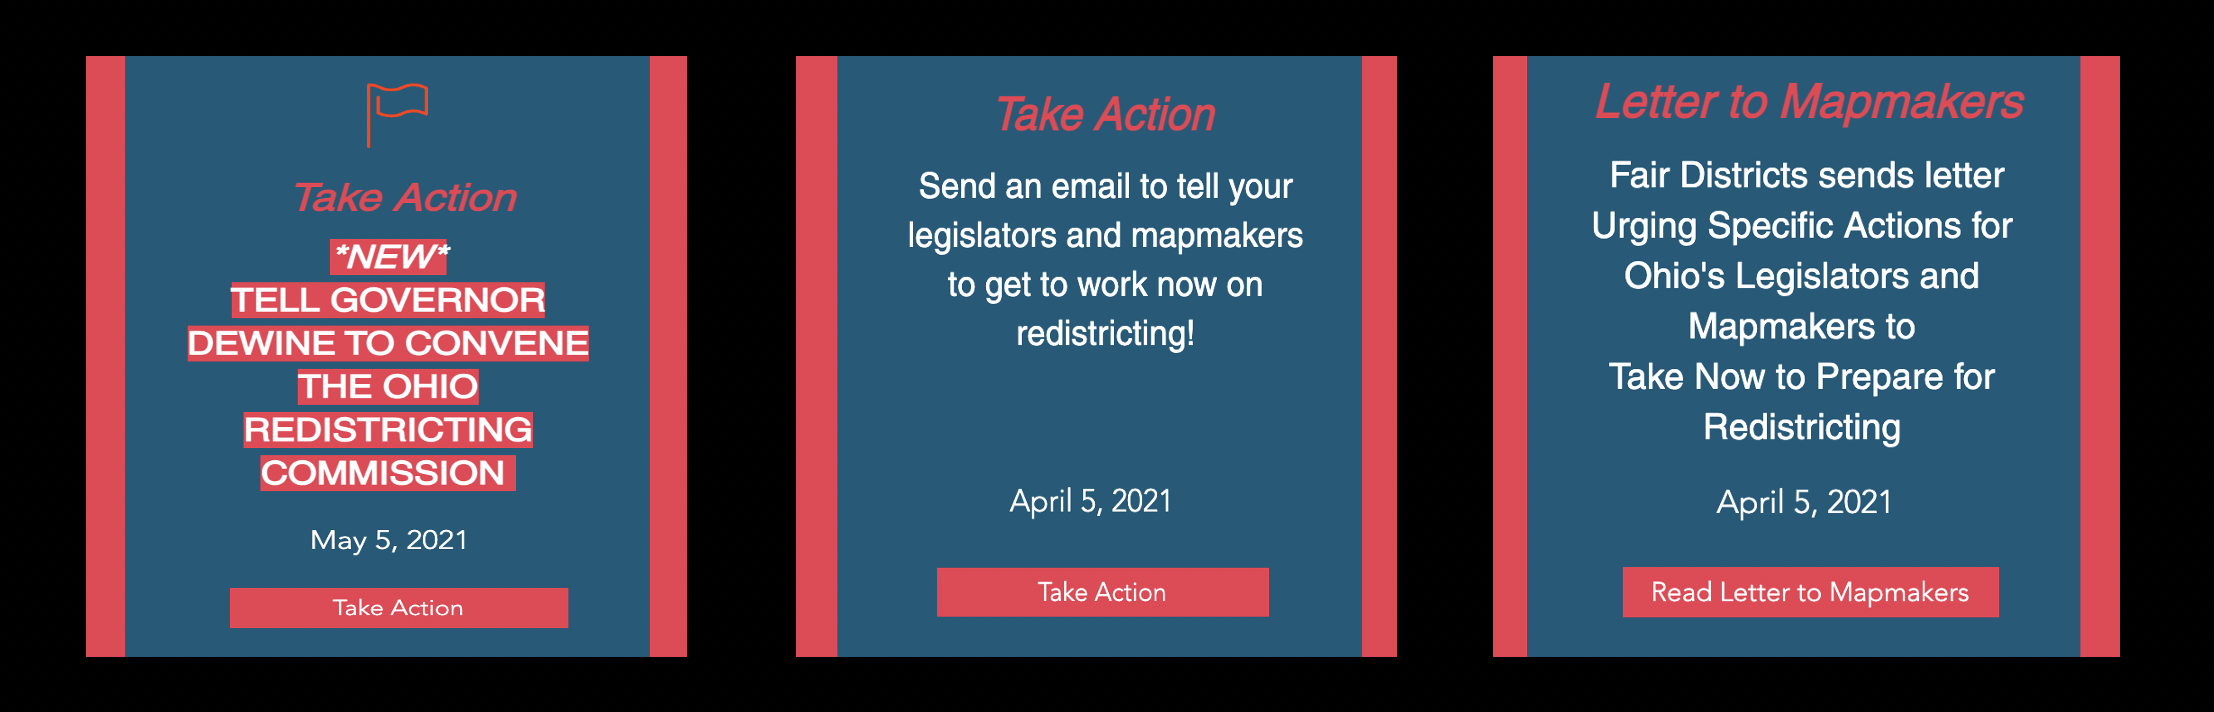 Fair Districts encourages volunteers to fight gerrymandering, legislative advocacy and drawing community maps for redistricting.